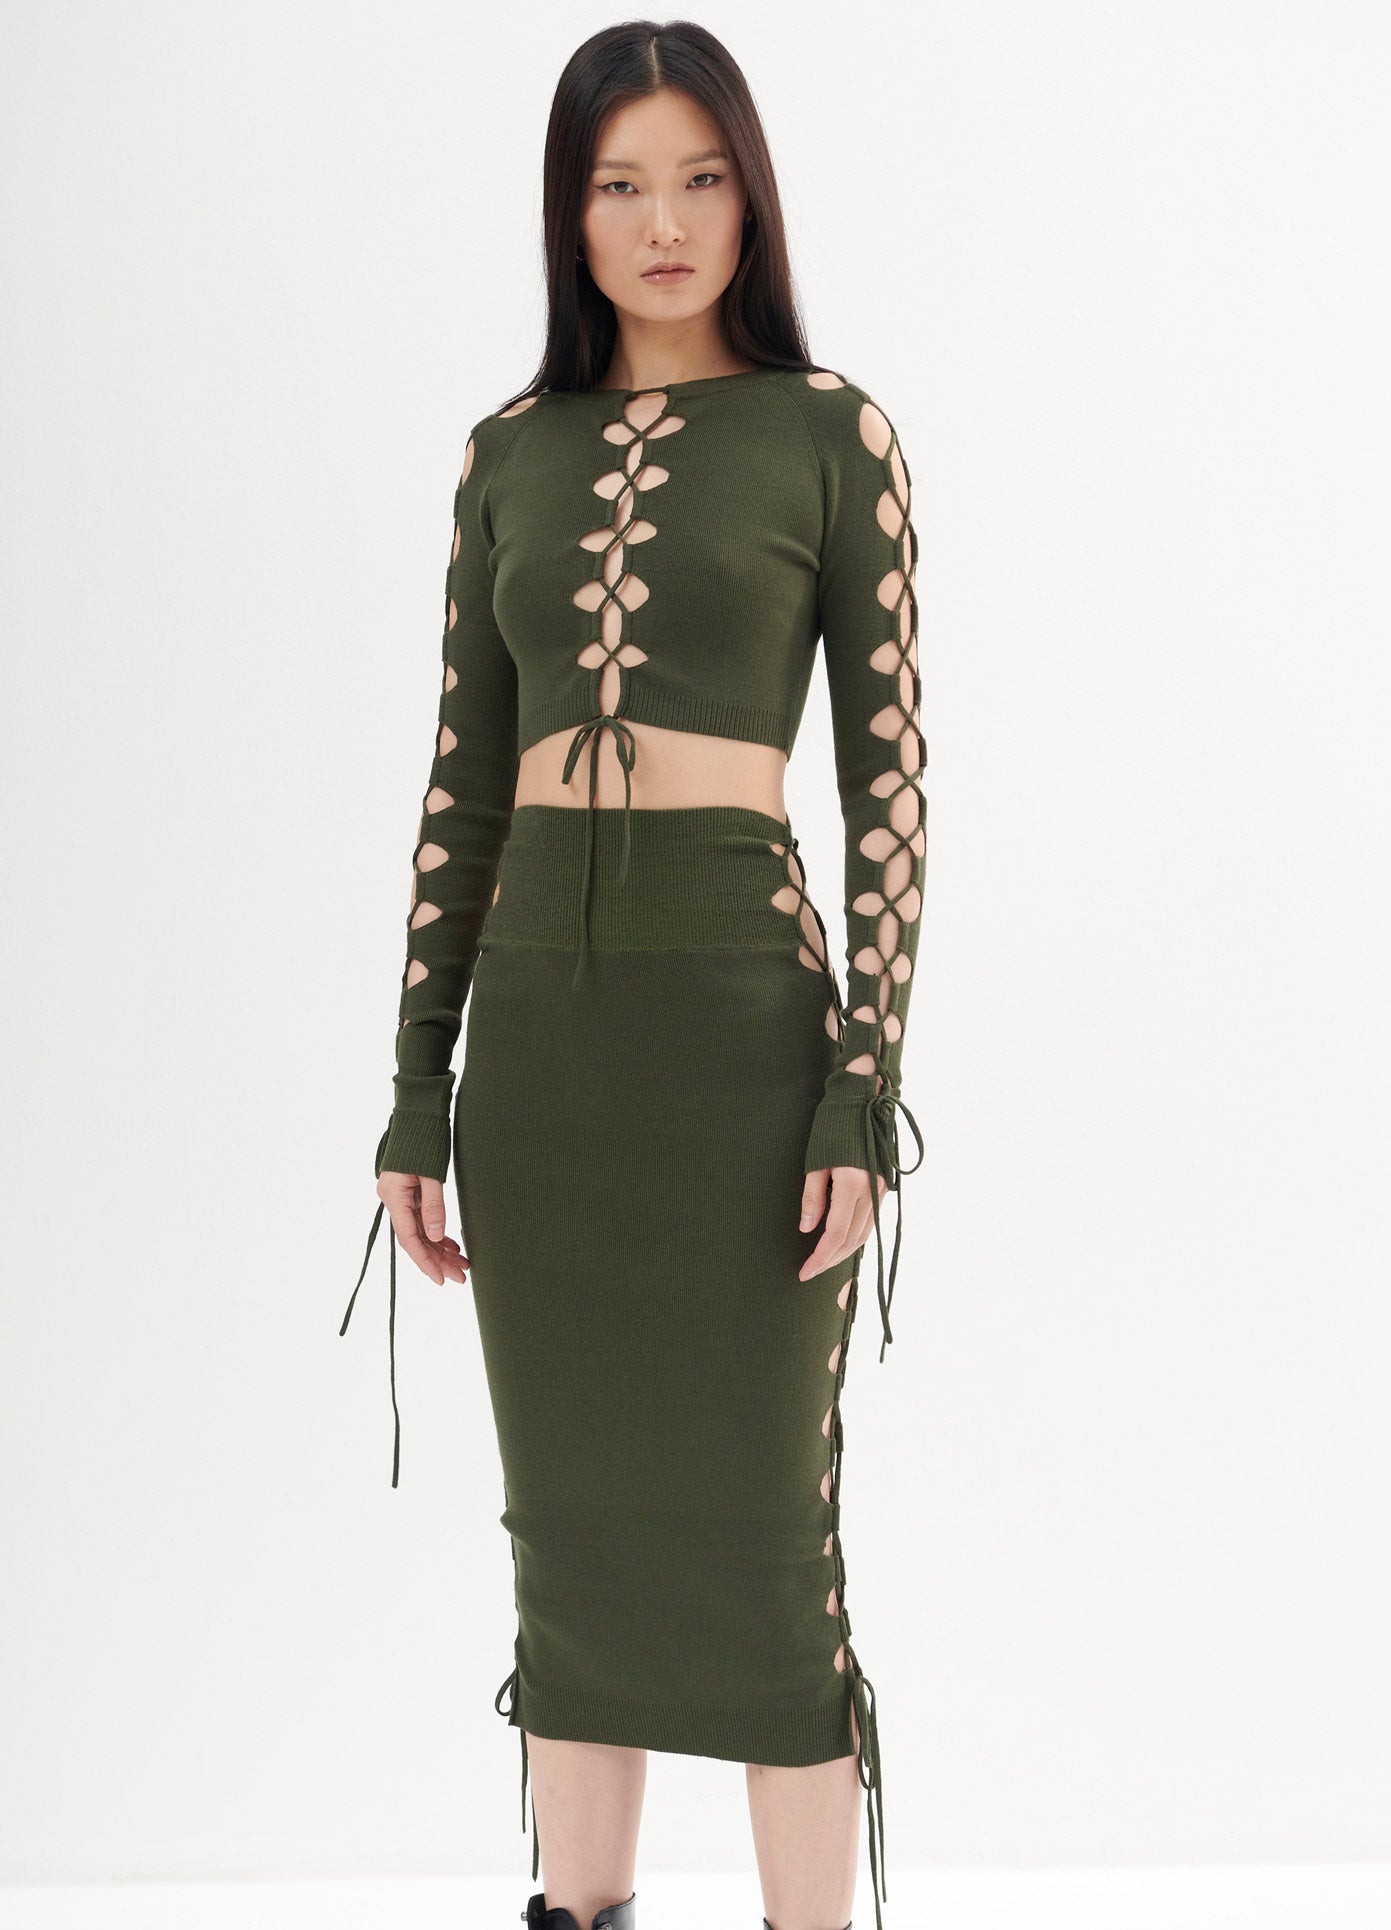 MONSE Lacing Knitted Skirt in Olive on Model Front View